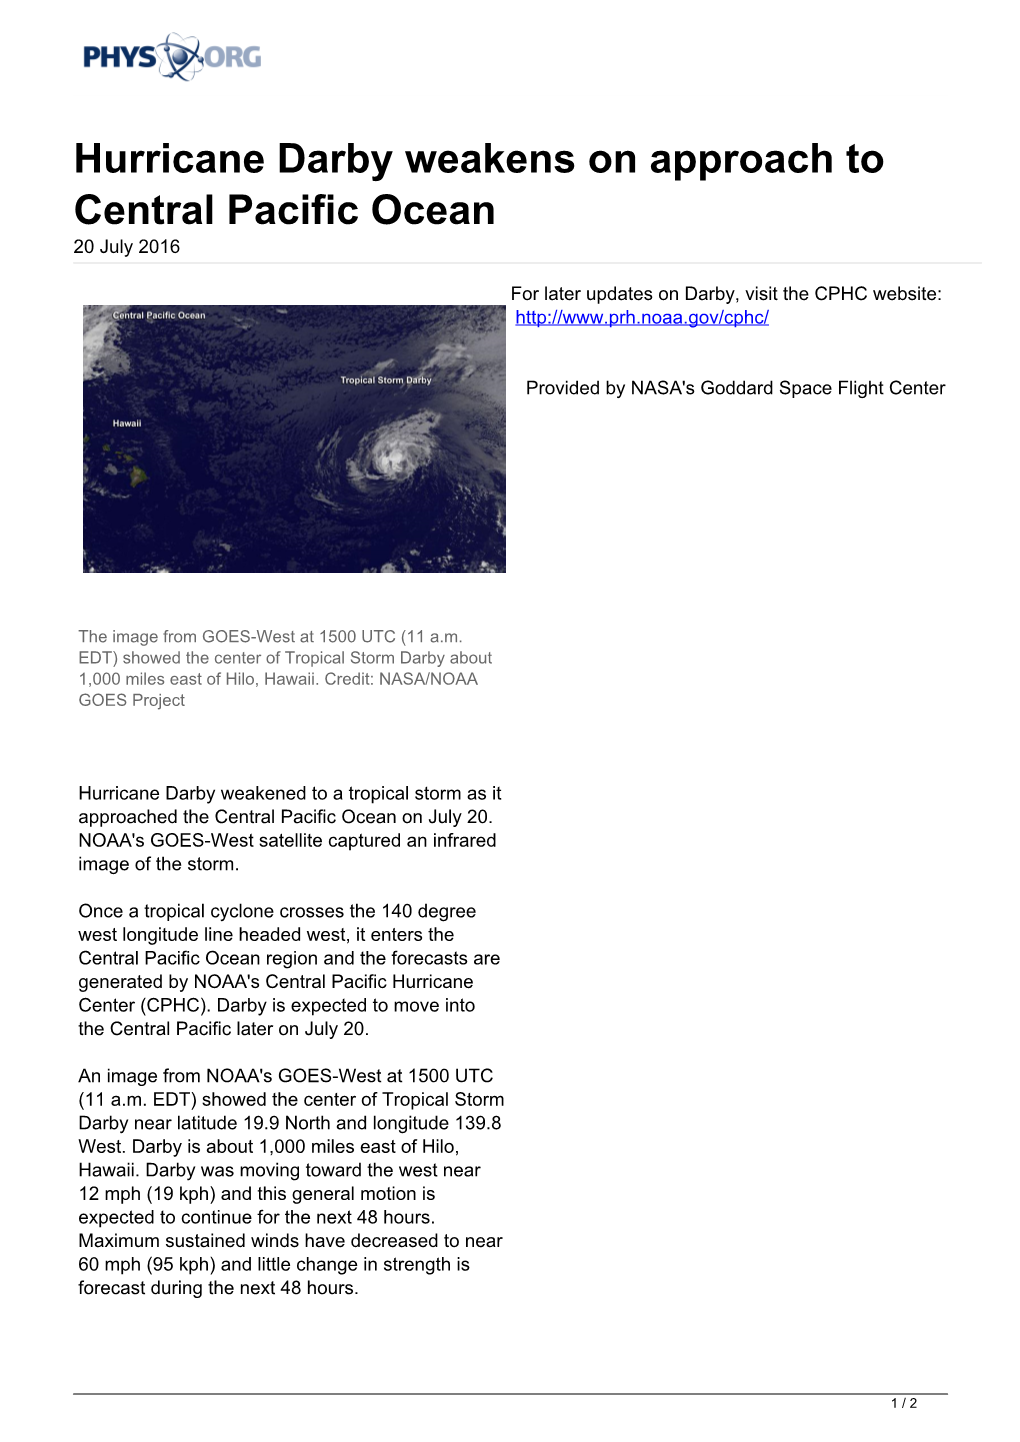 Hurricane Darby Weakens on Approach to Central Pacific Ocean 20 July 2016